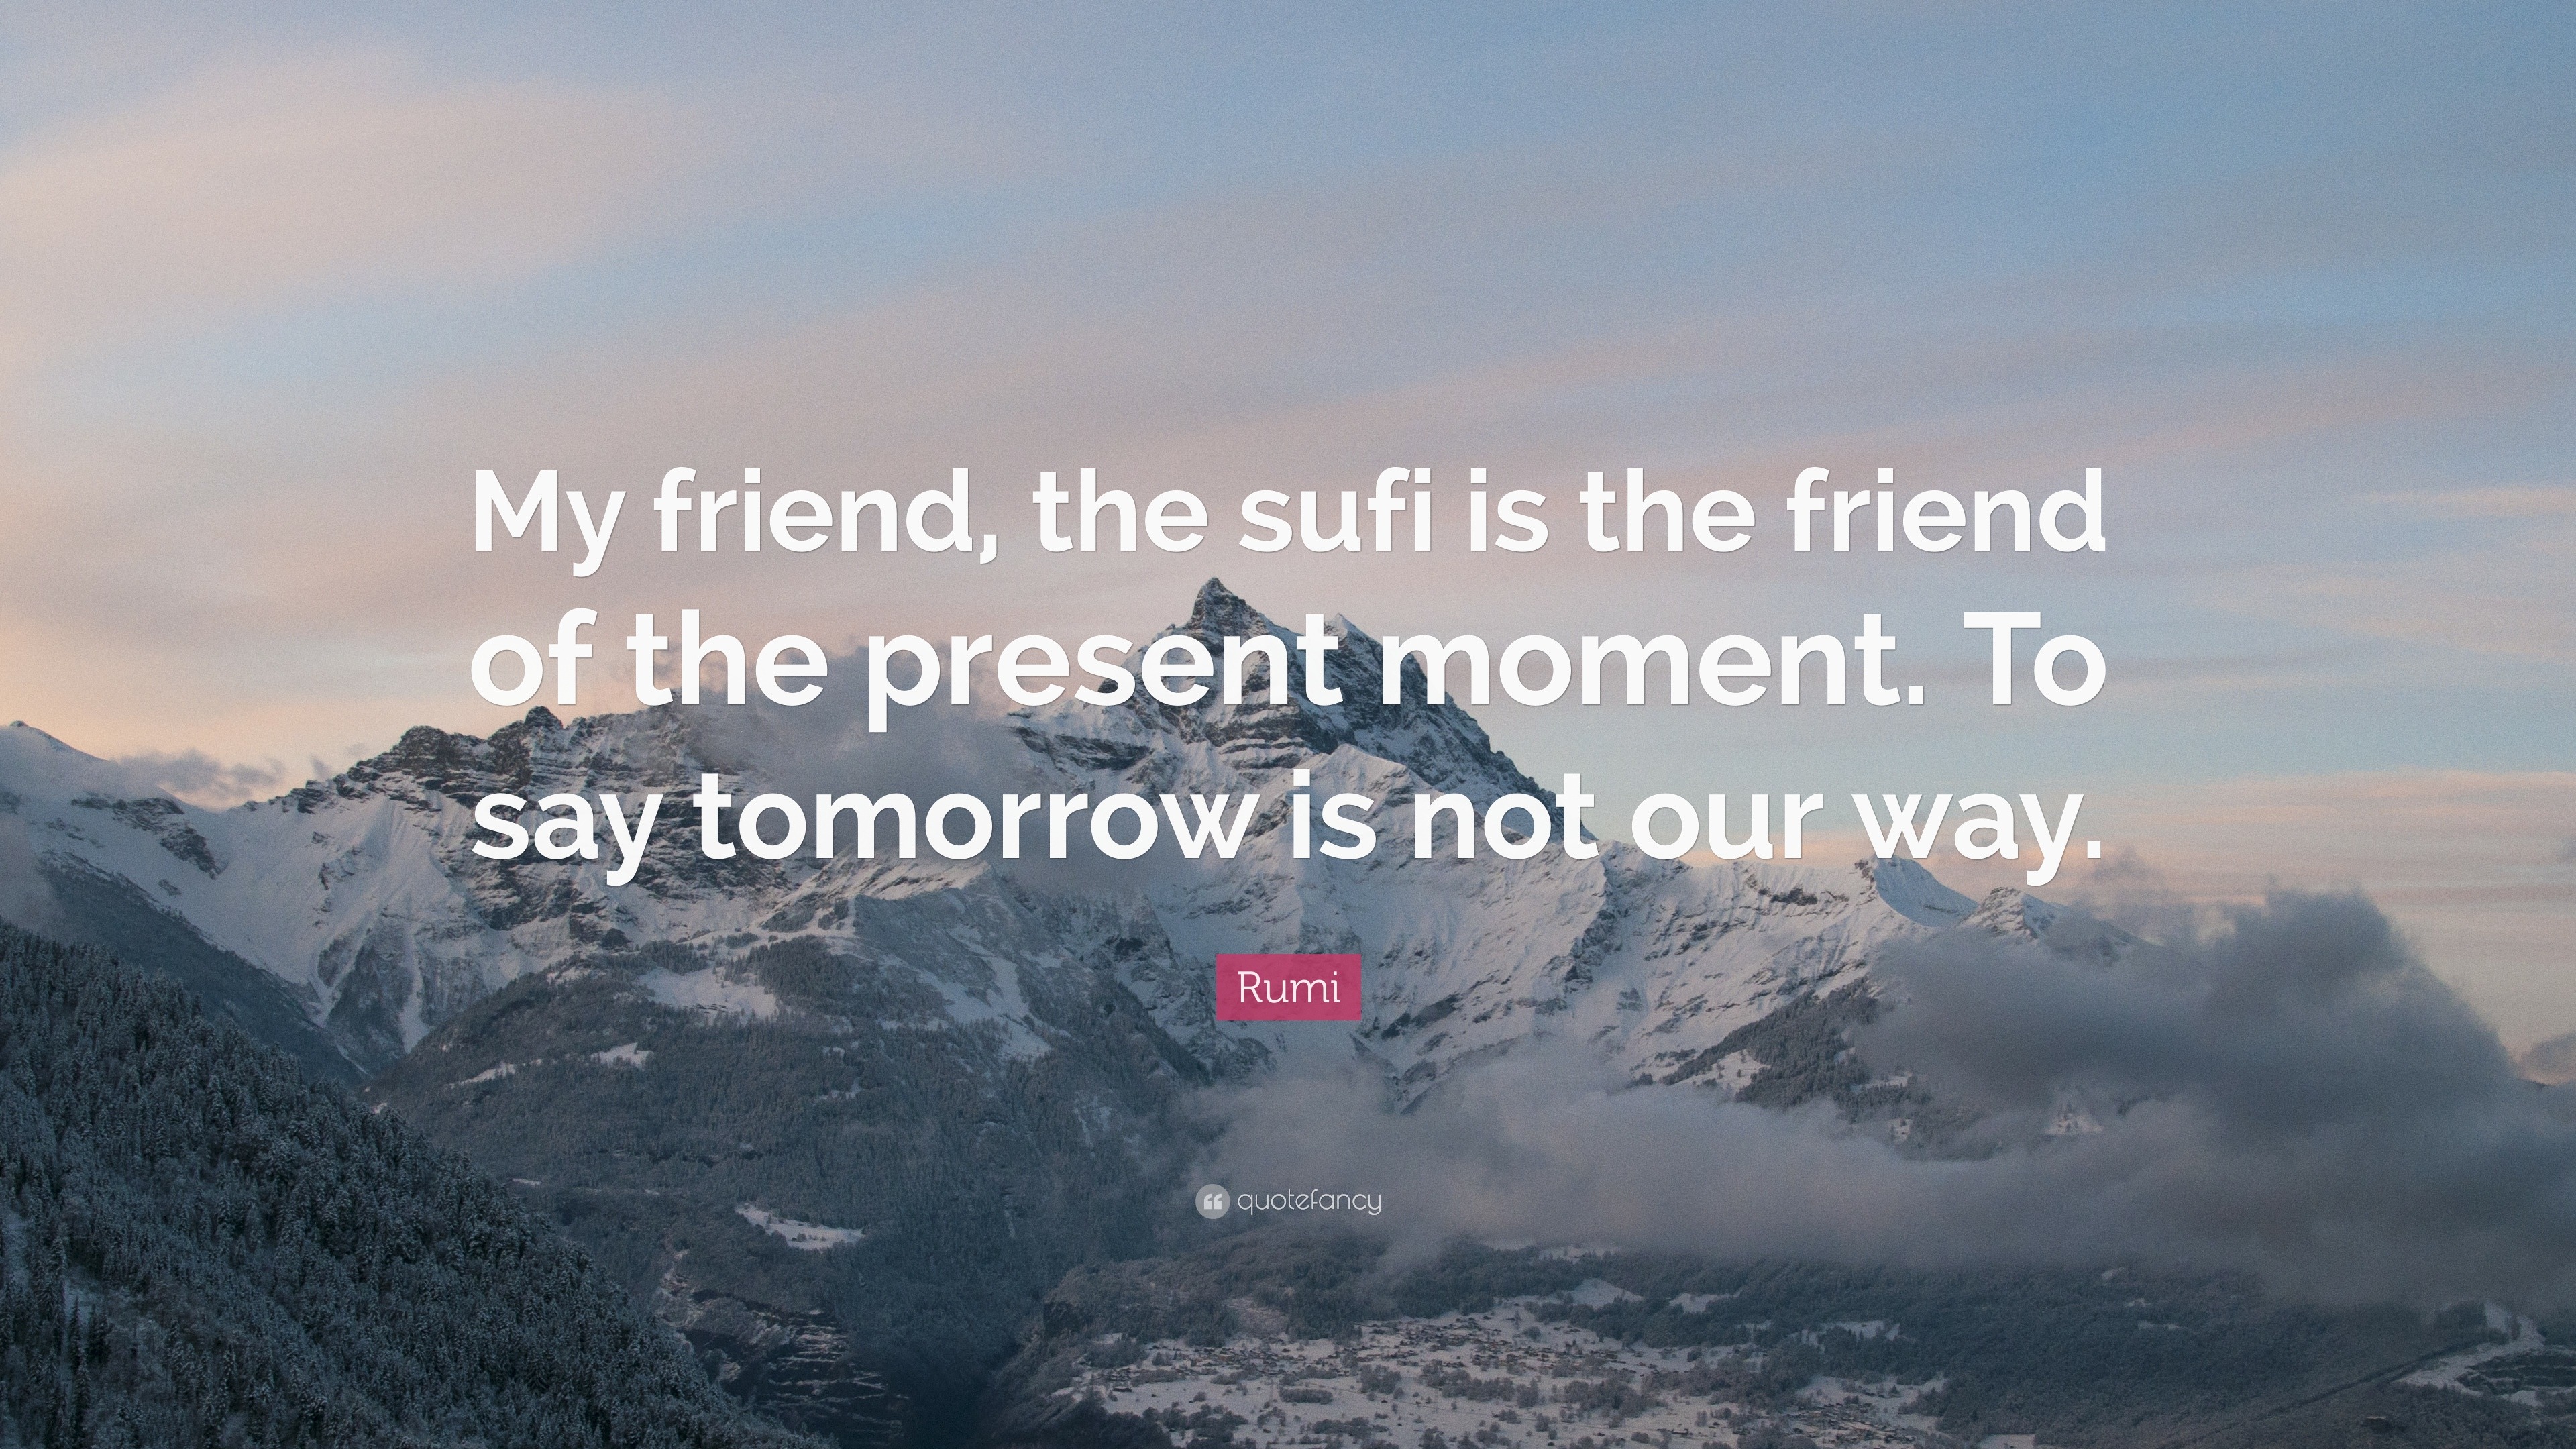 Rumi Quote: "My friend, the sufi is the friend of the present moment. To say tomorrow is not our ...